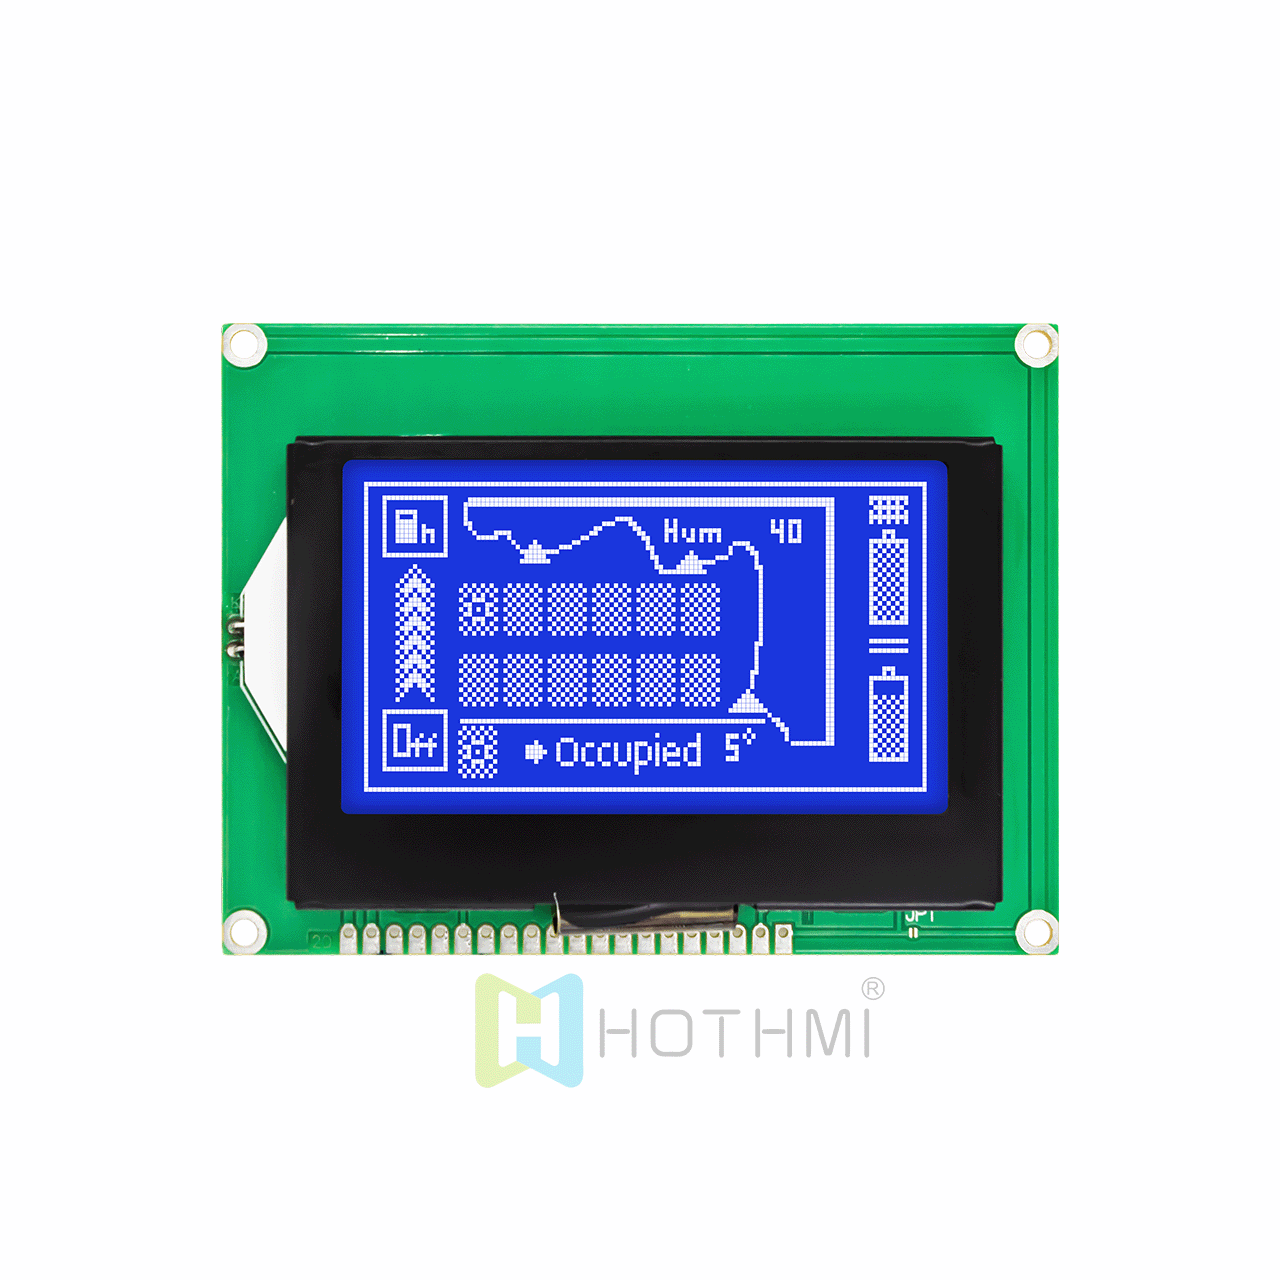 3-inch 128x64 graphic LCD | 12864LCM | 128X64 graphic LCD display | STN negative display white backlight | 5.0V | White text on blue background